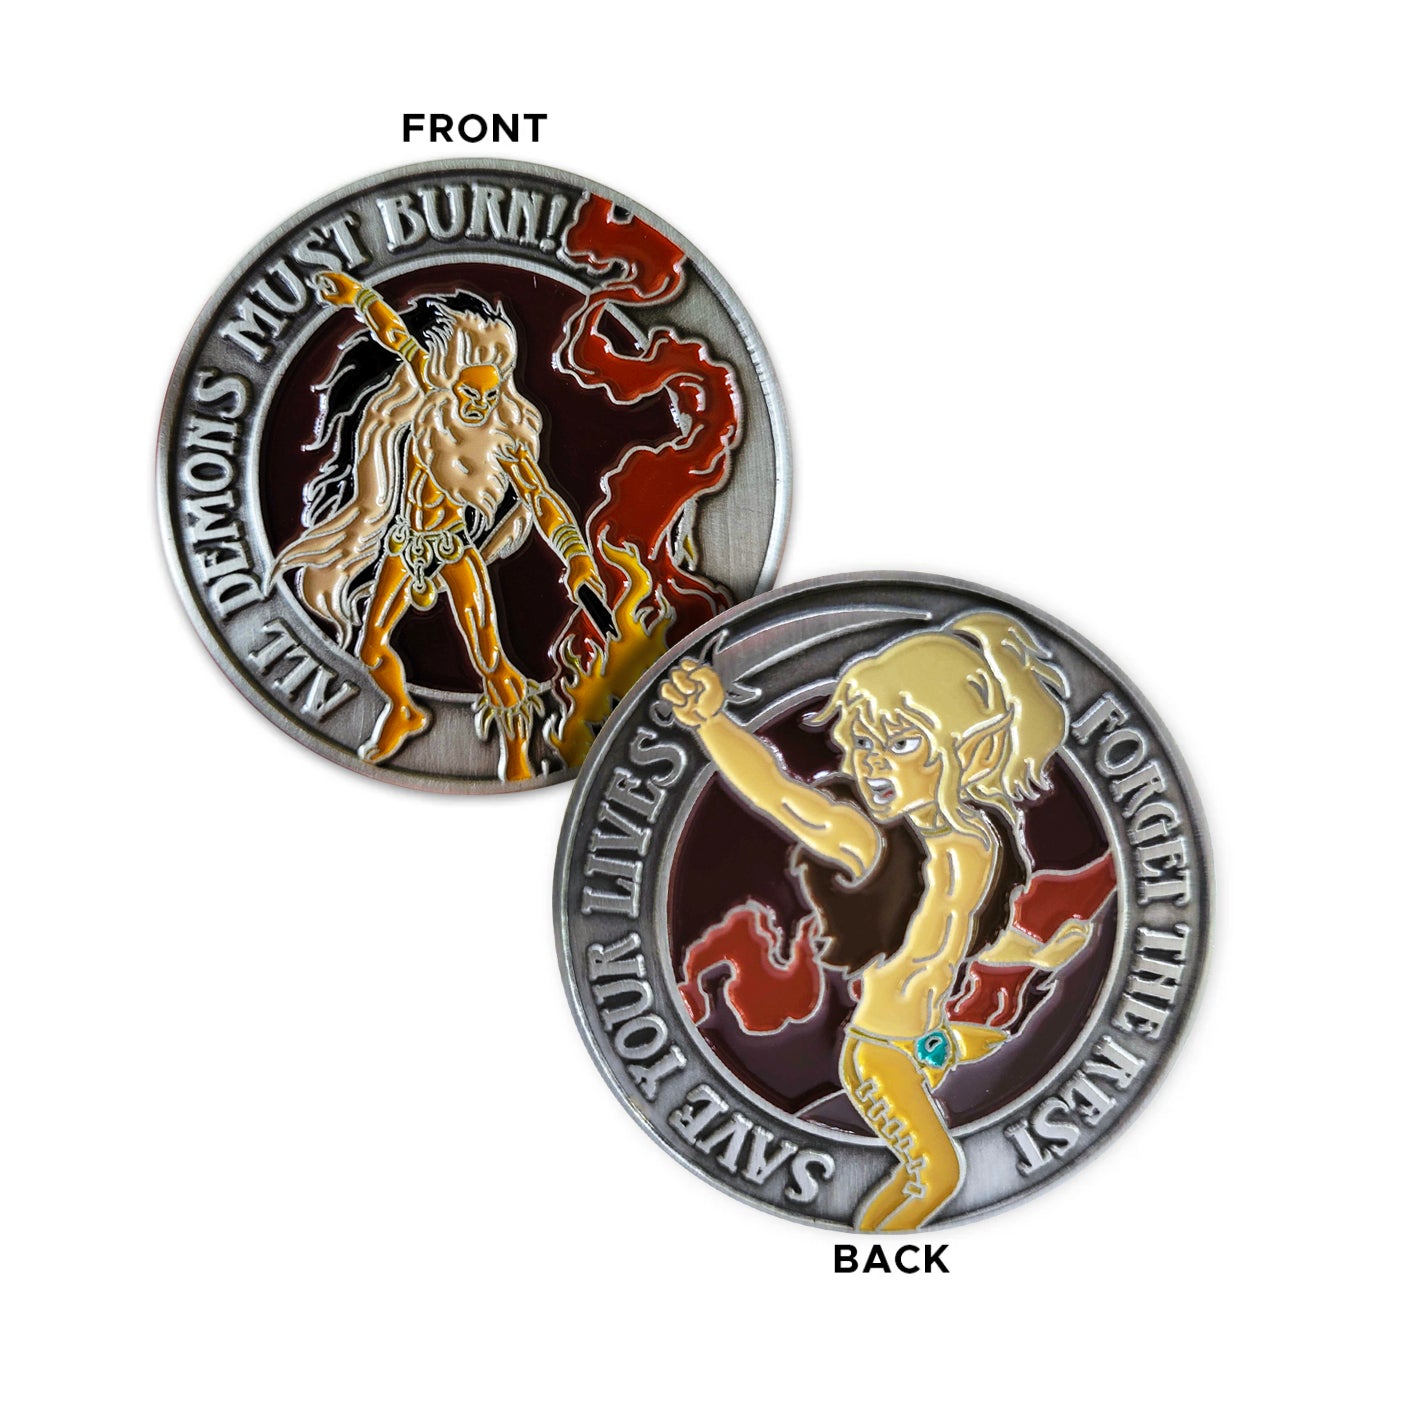 A front and back image of a brass challenge coin. On the front is a drawing of the Elfquest character Leetah. Raised text around the edge says “all demons must burn.” The back of the coin depicts the characters Nightfall and Redlance. Around the edge, raised text says “Save your lives, forget the rest."